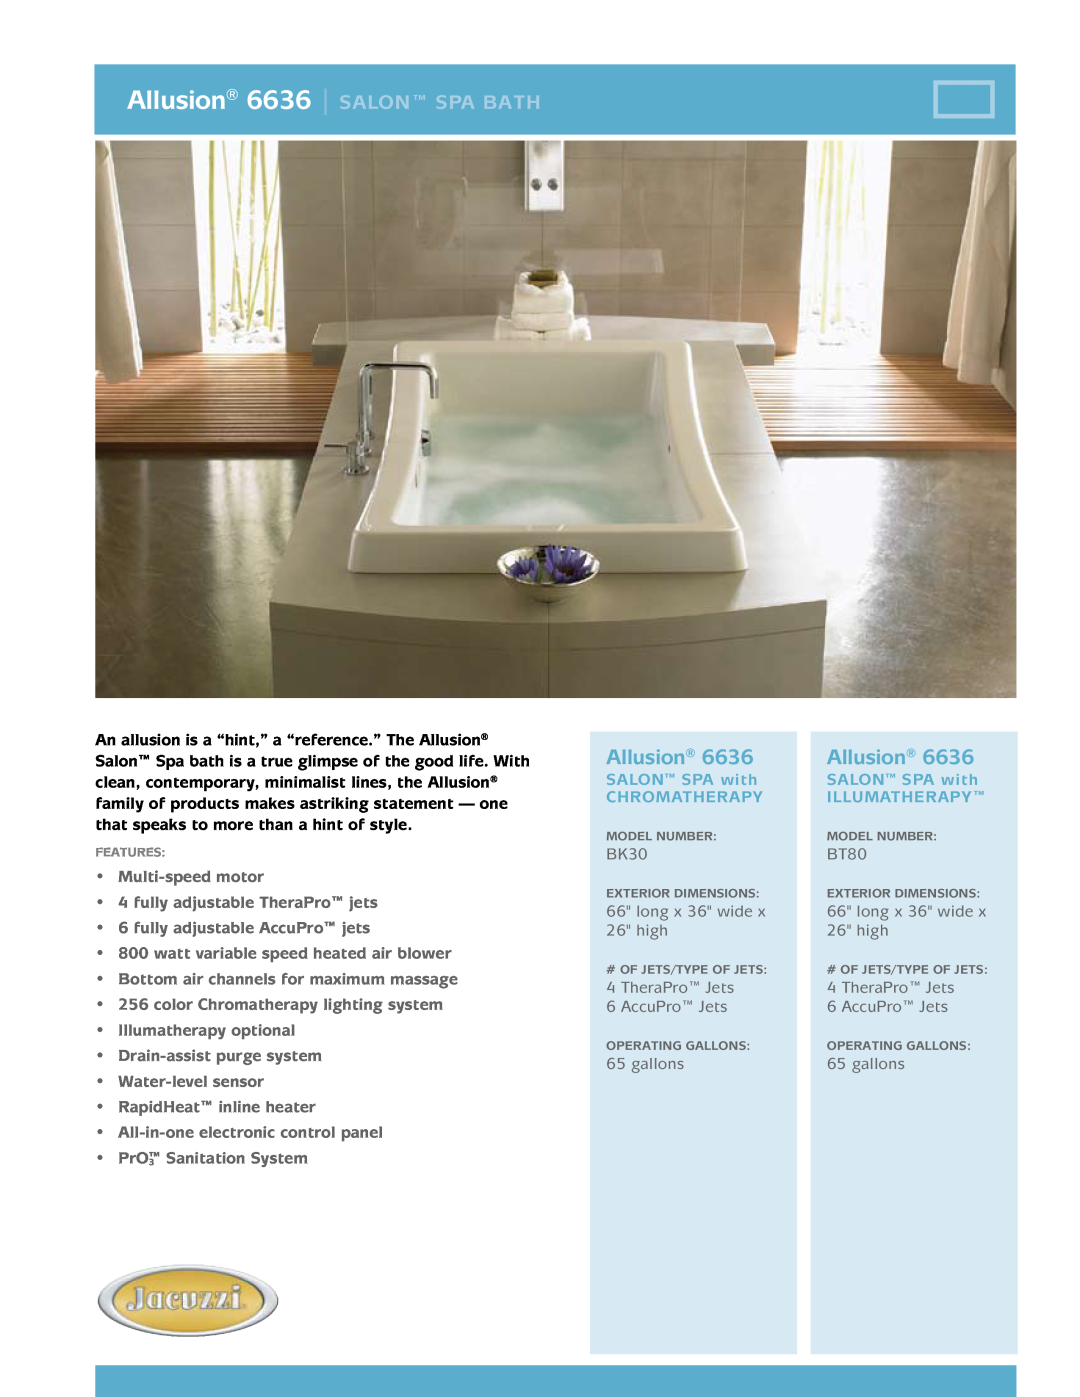 Jacuzzi technical specifications Duetta 6636 Whirlpool, Technical Specifications, Features, Upgrades & Accessories 